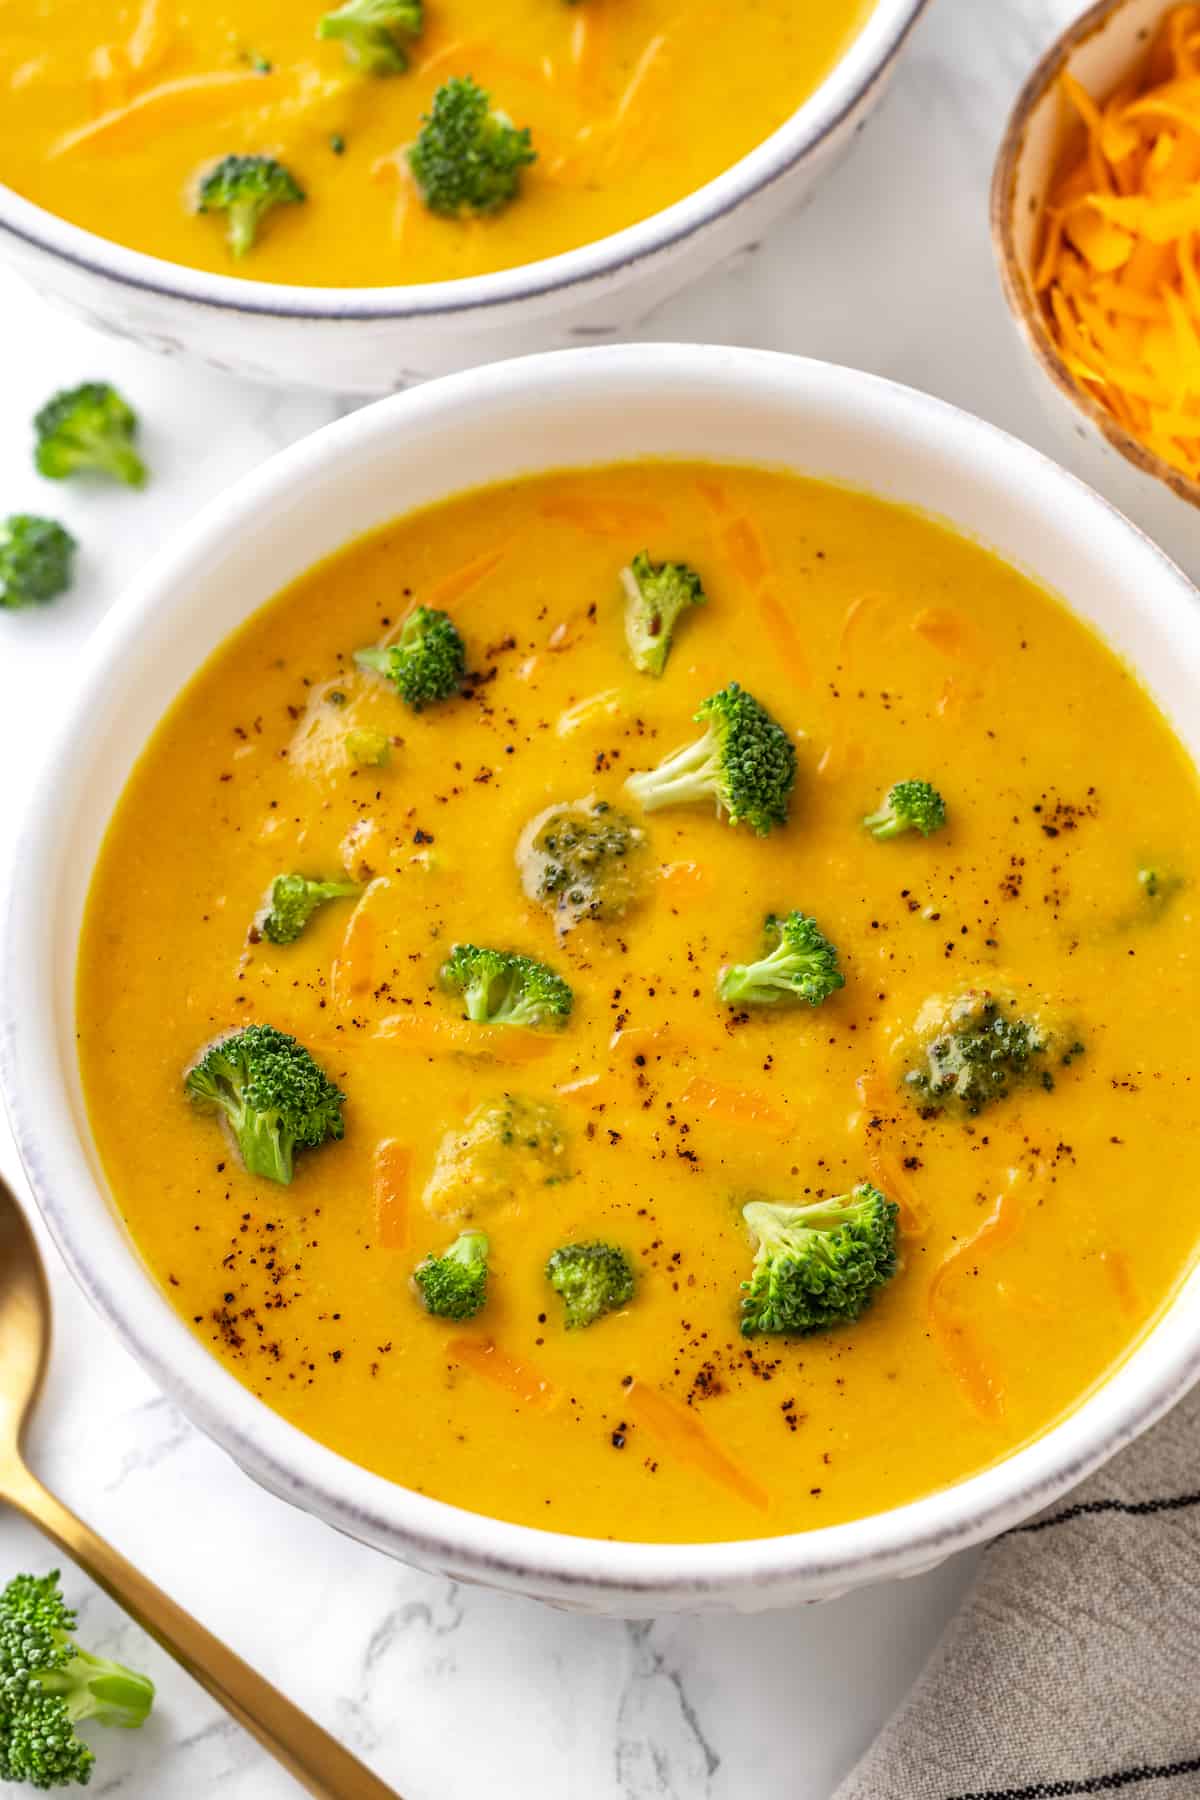 Overhead view of vegan broccoli cheddar soup in bowl